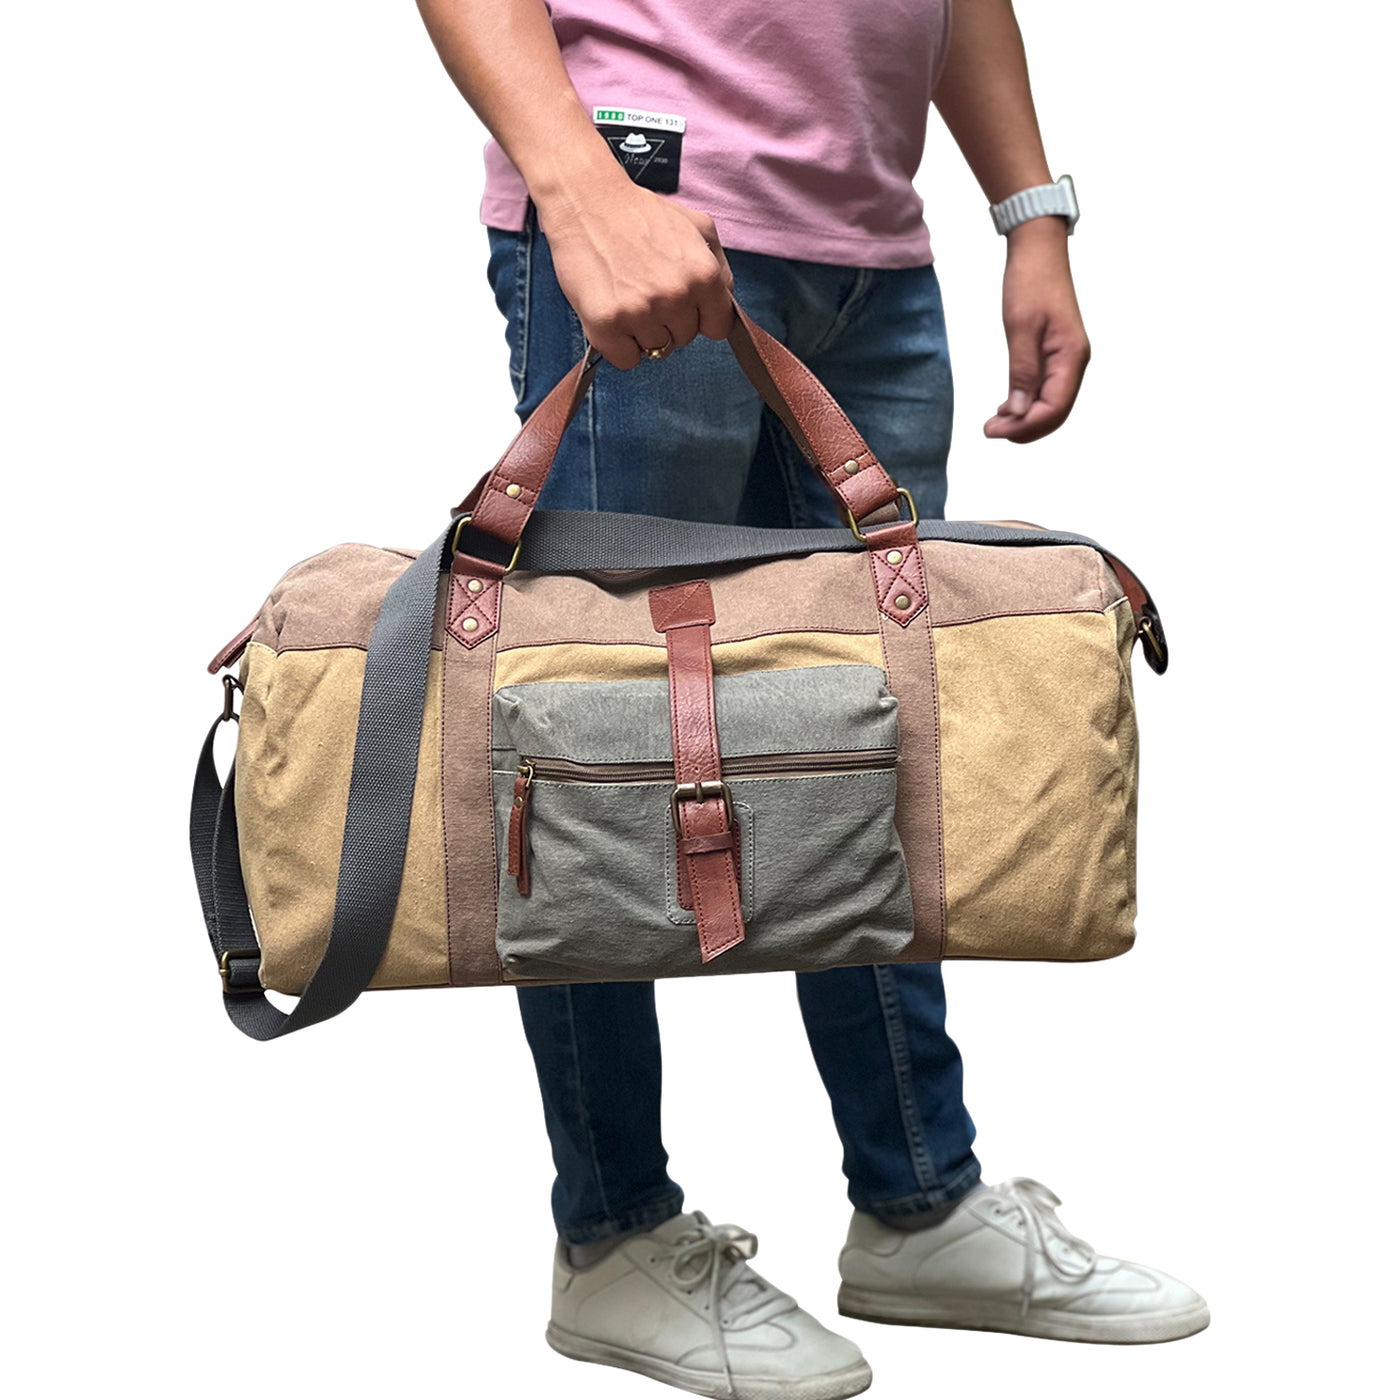 Mona B Sebastian 100% Cotton Canvas Duffel Gym Travel and Sports Bag with Outside Zippered Pocket and Stylish Design for Men and Women: Brown